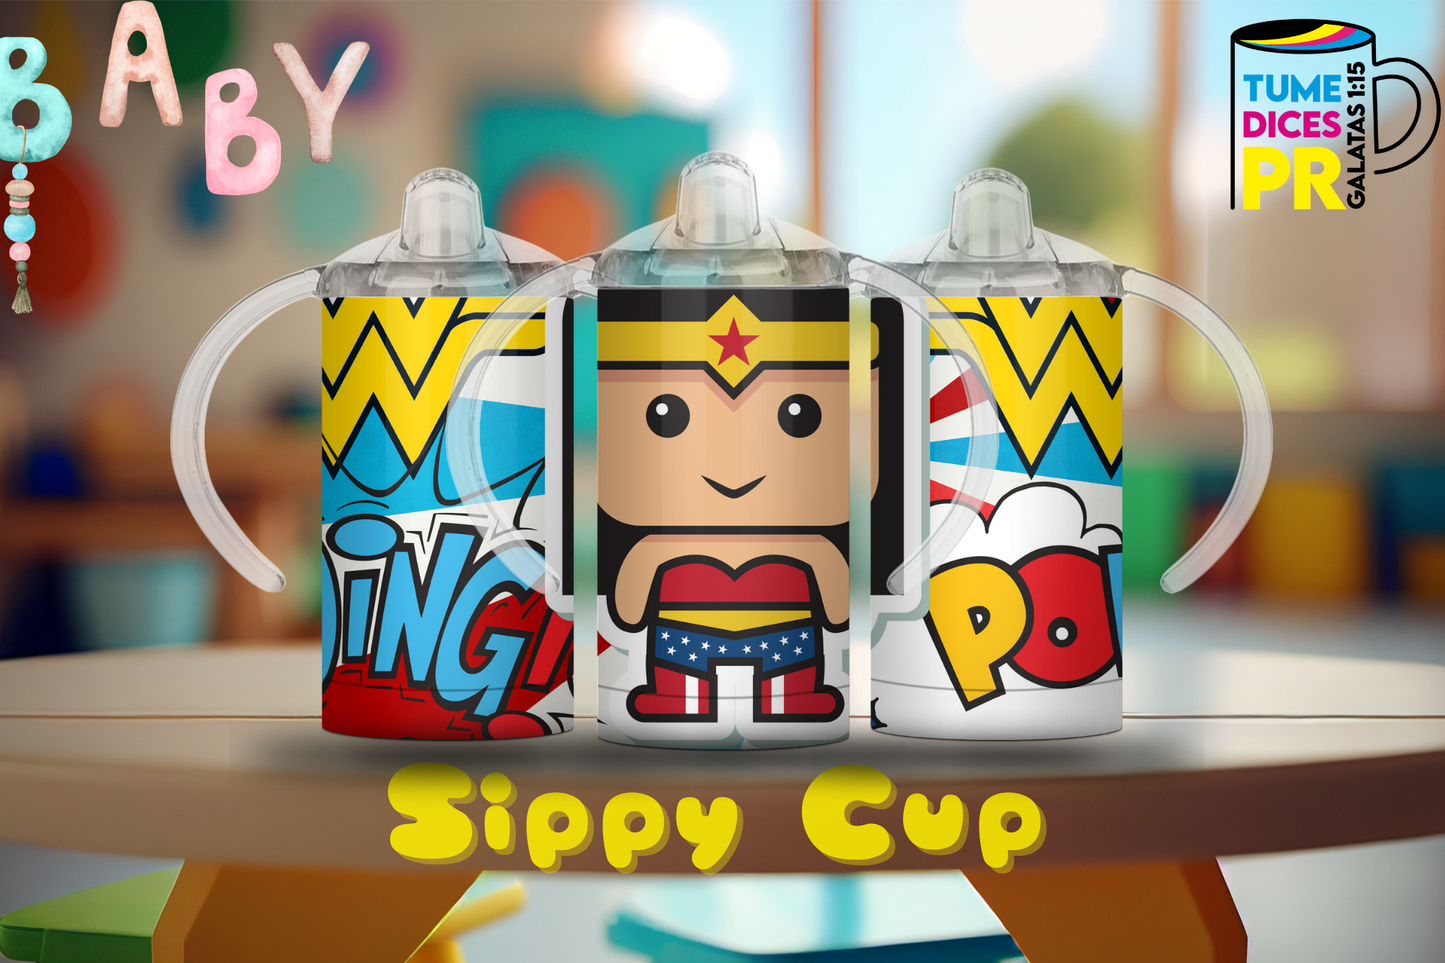 Sippy Cup 6